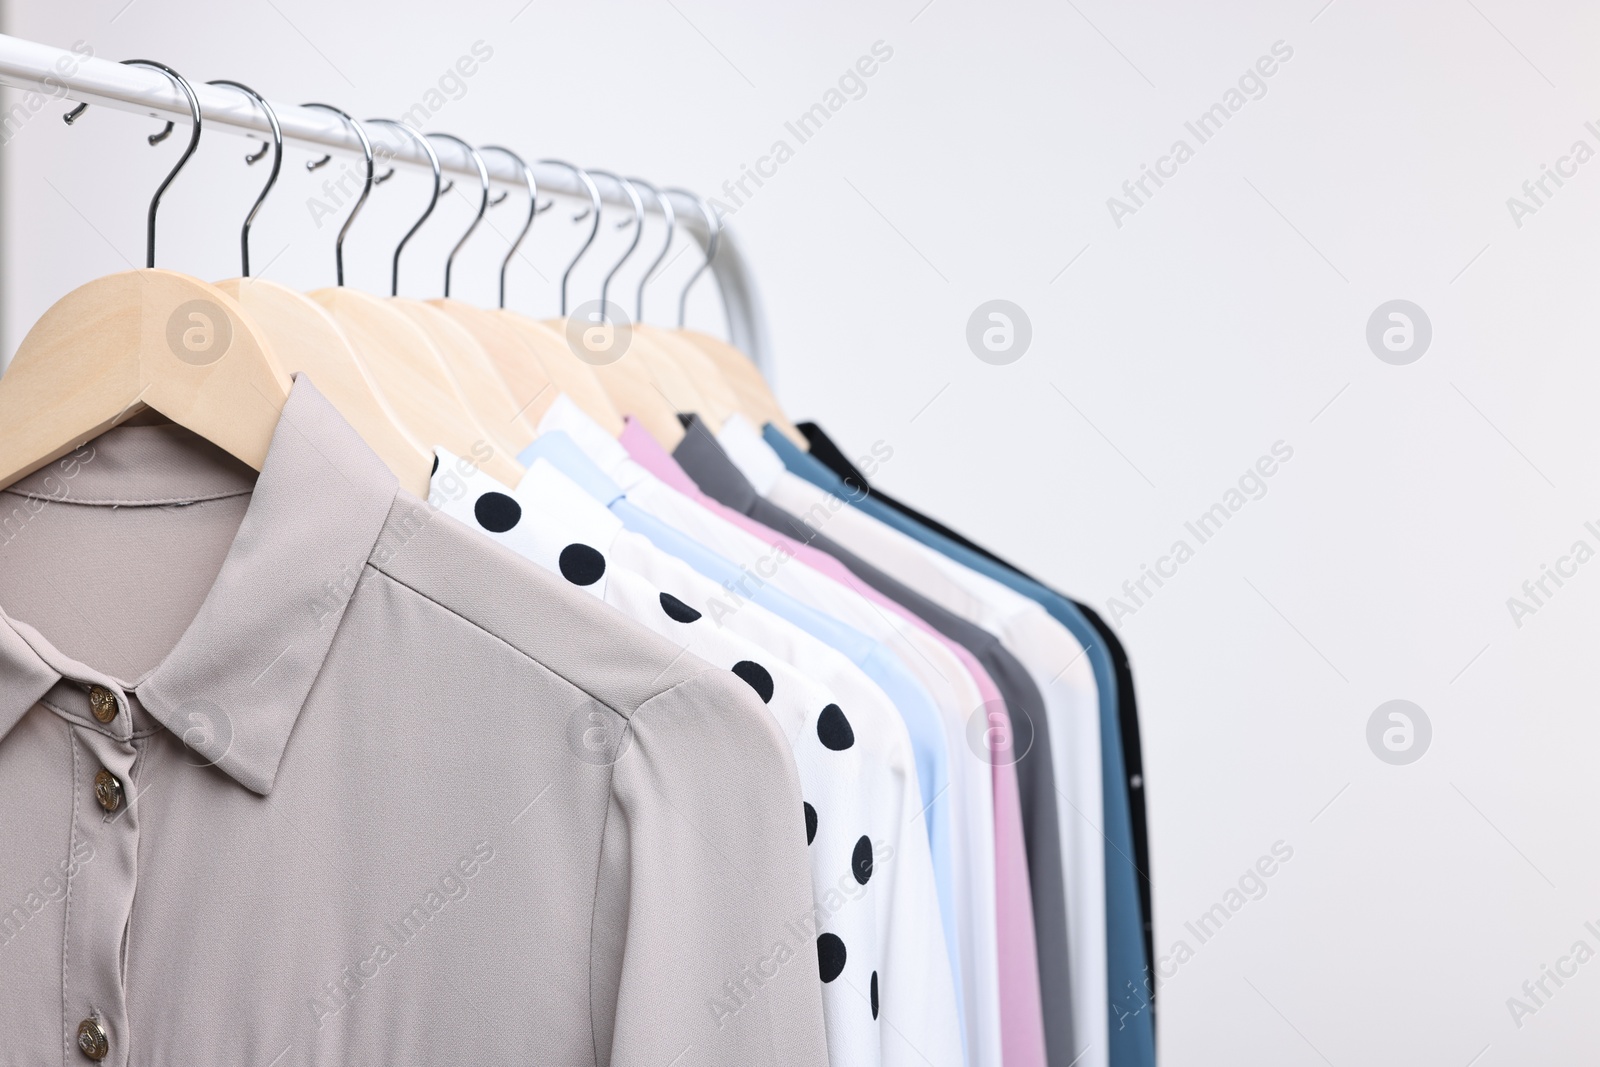 Photo of Dry-cleaning service. Many different clothes hanging on rack against white background, space for text